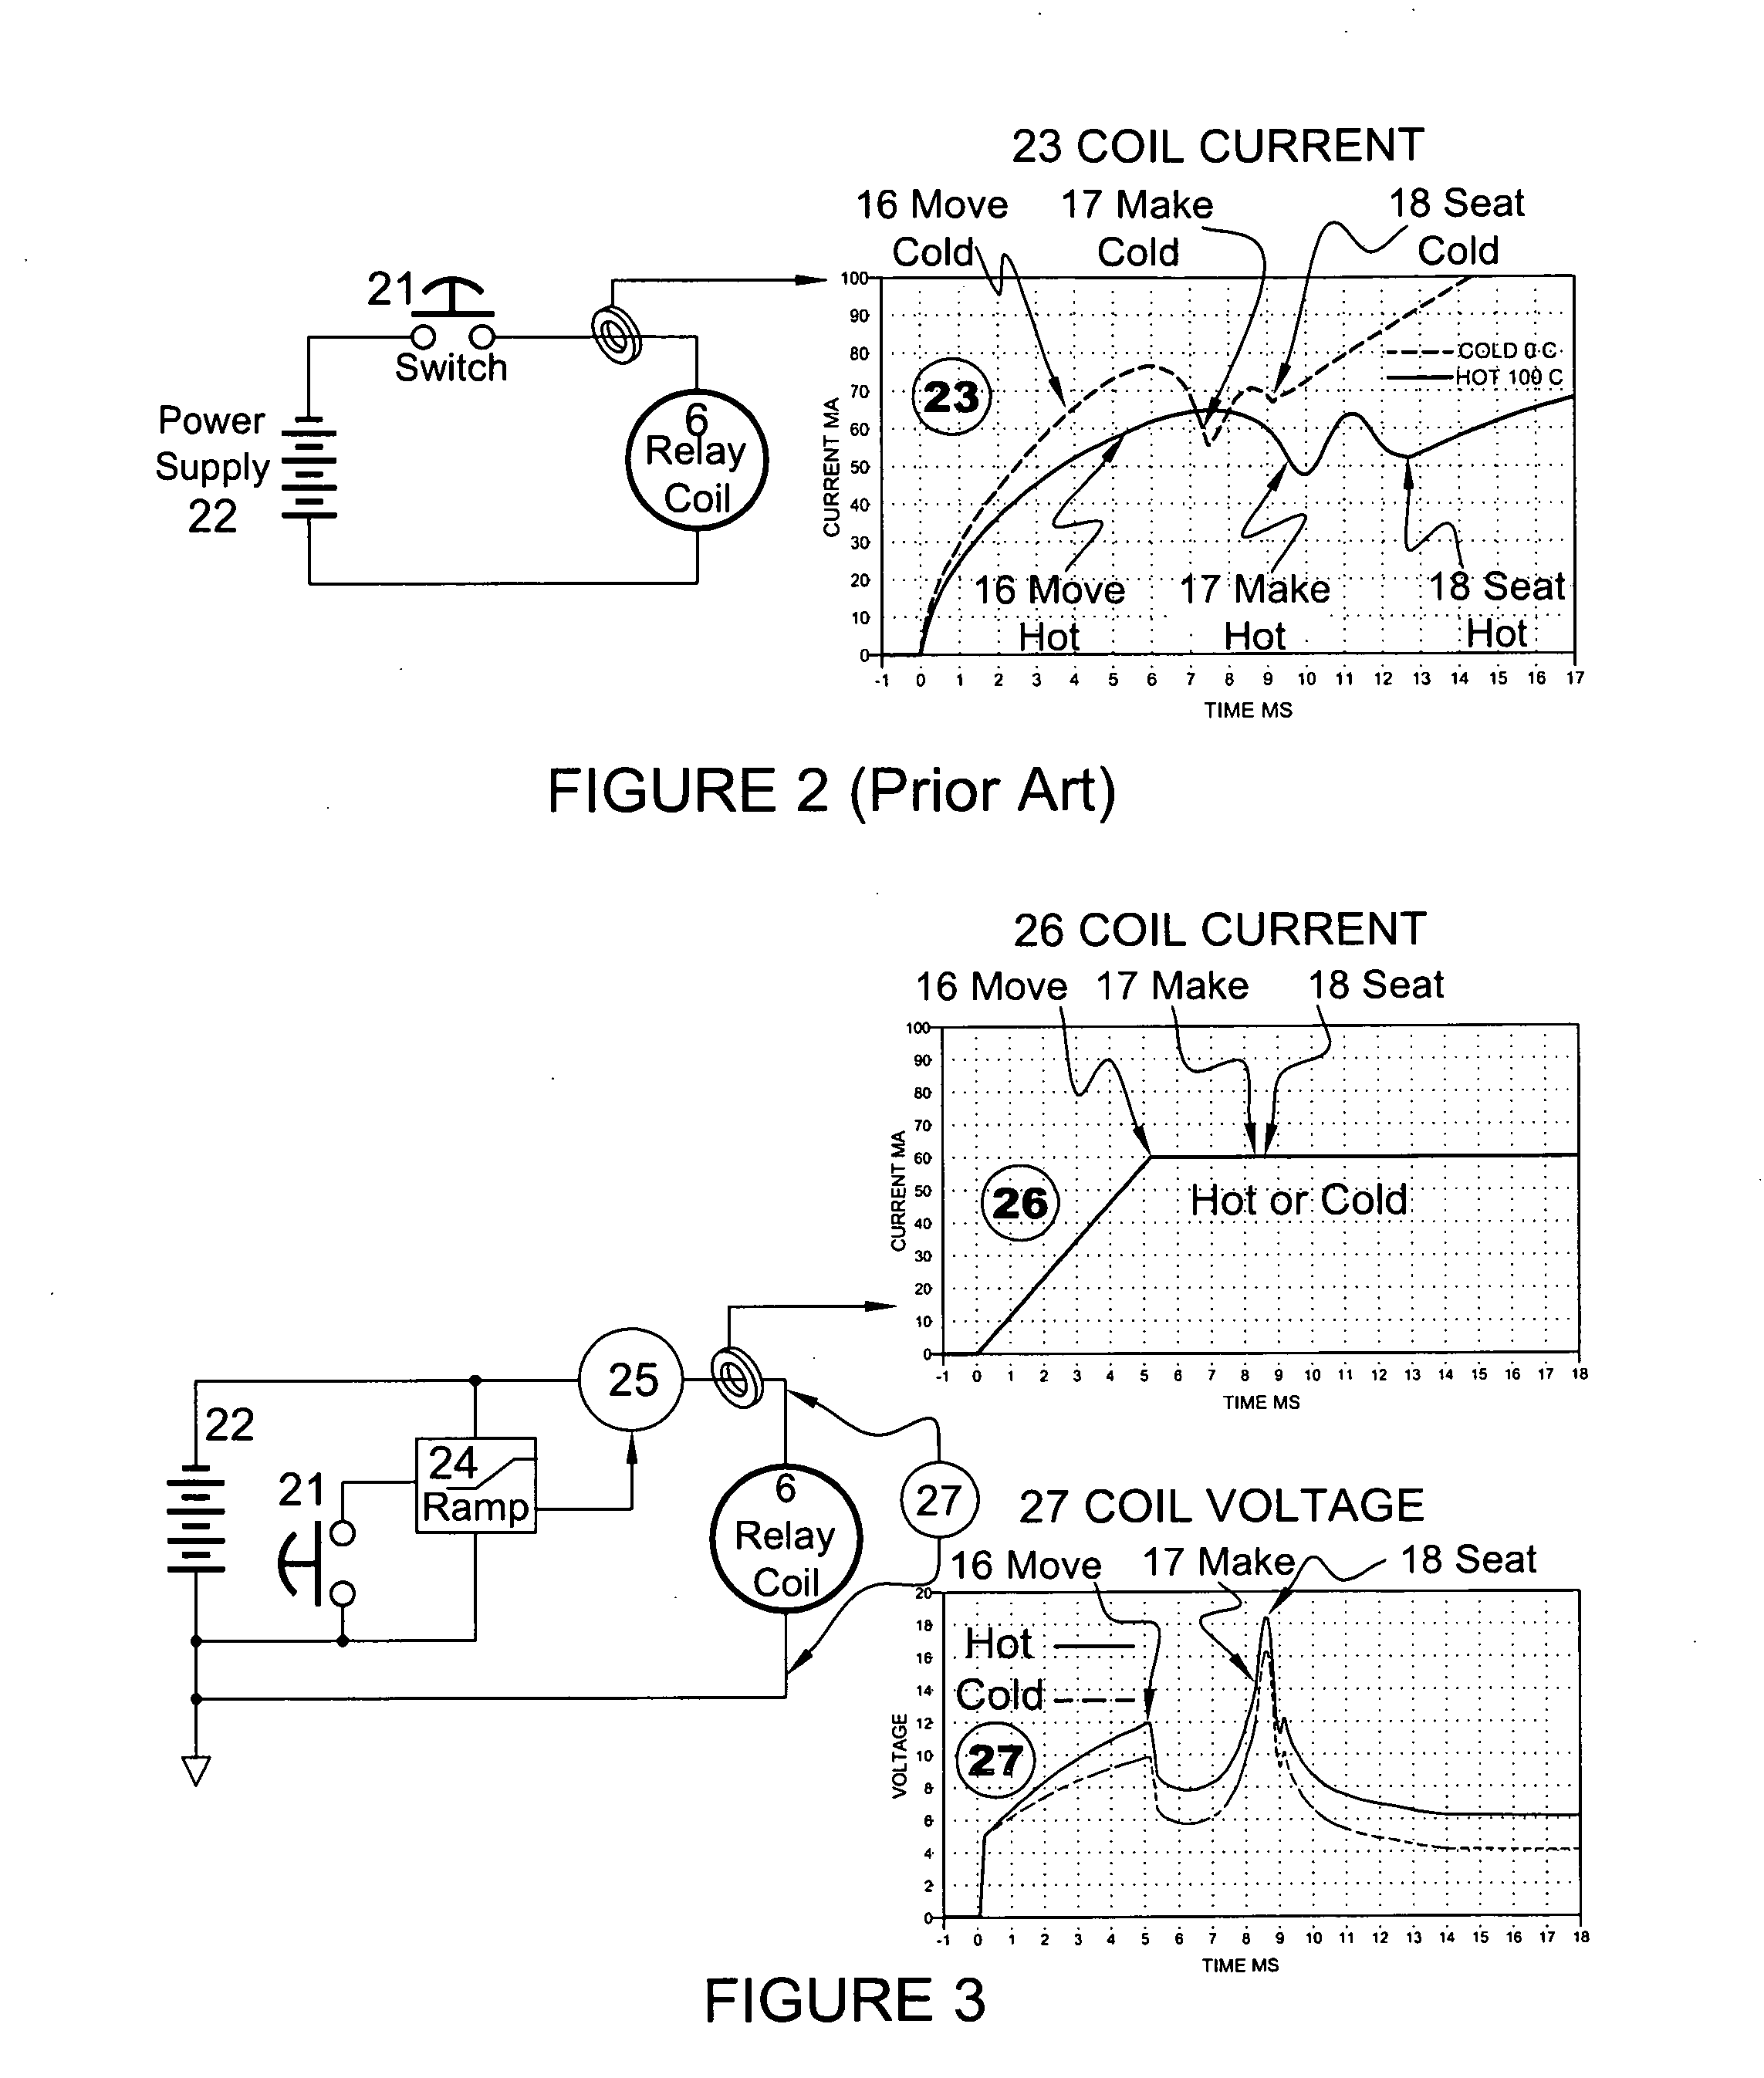 Relay Coil Drive Circuit